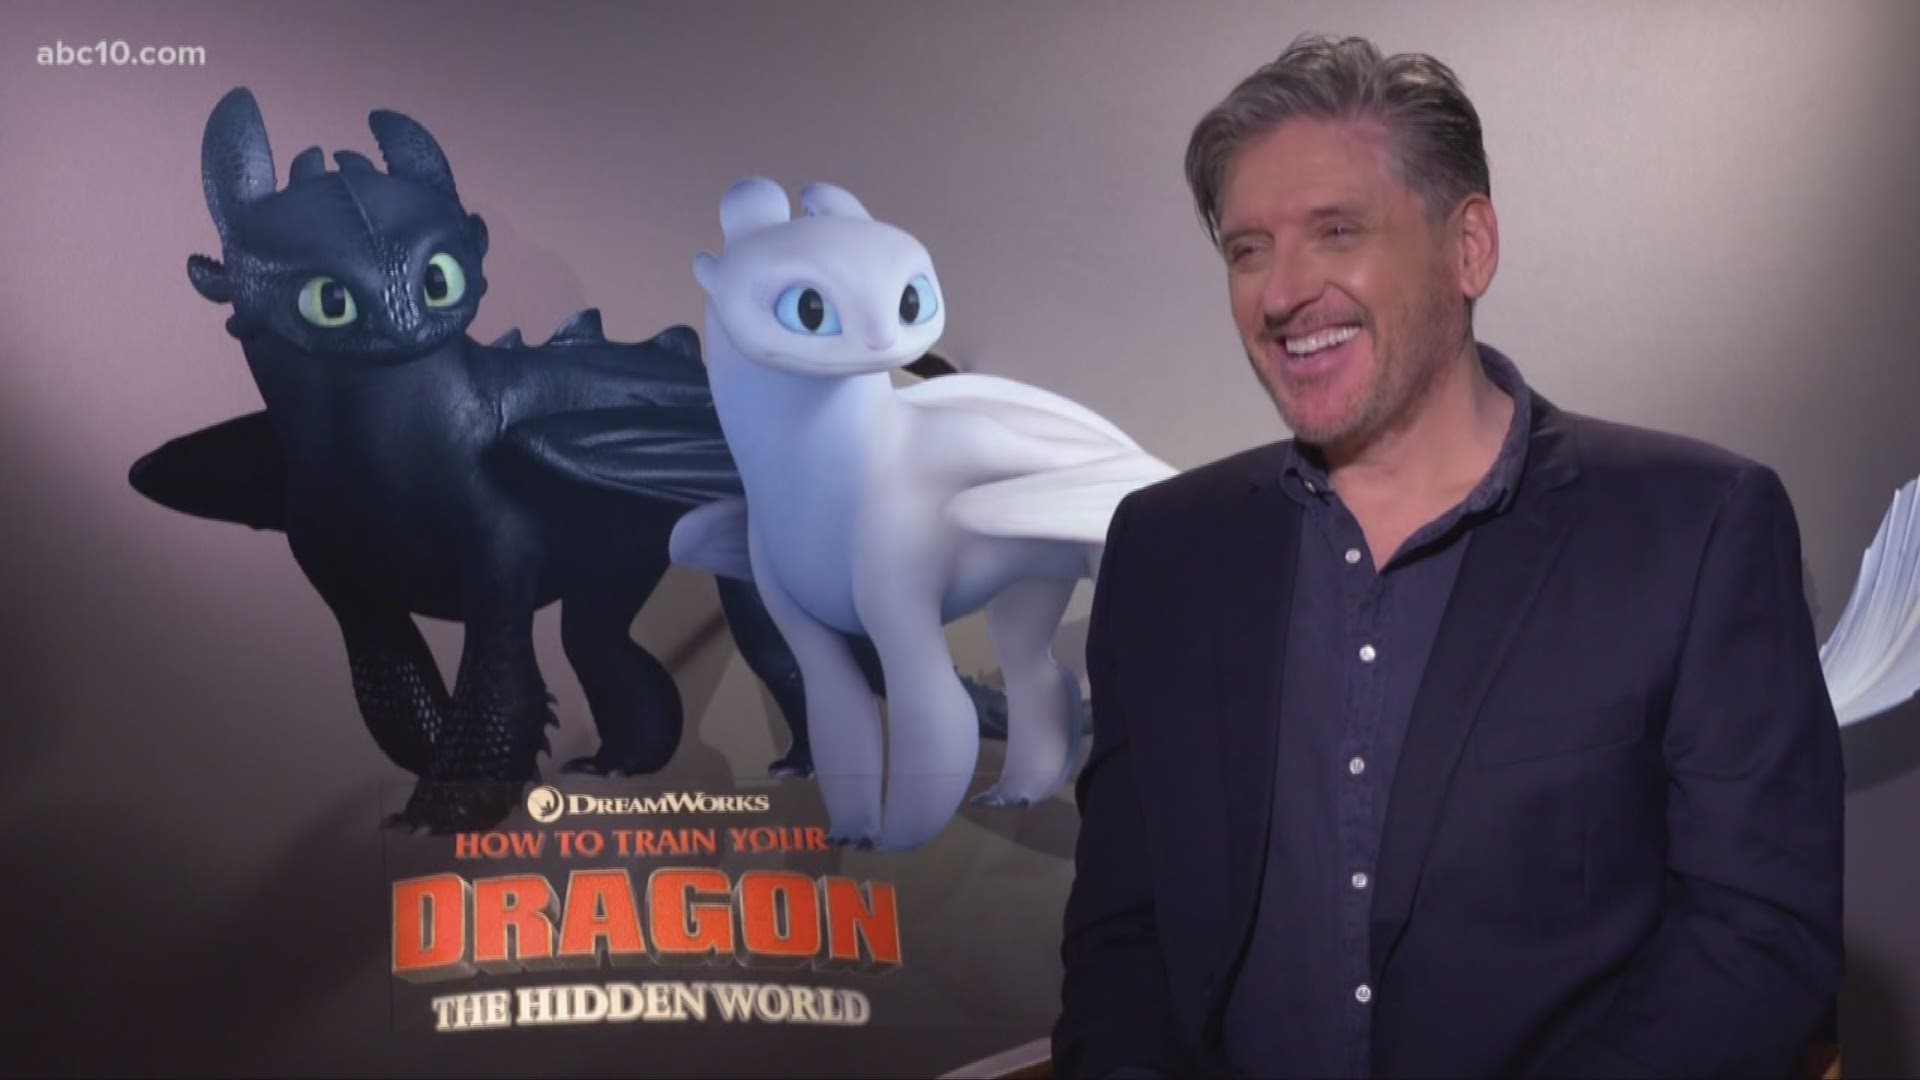 Mark S. Allen sat down with comedian Craig Ferguson to talk about the finale of the 'How to Train Your Dragon" trilogy.